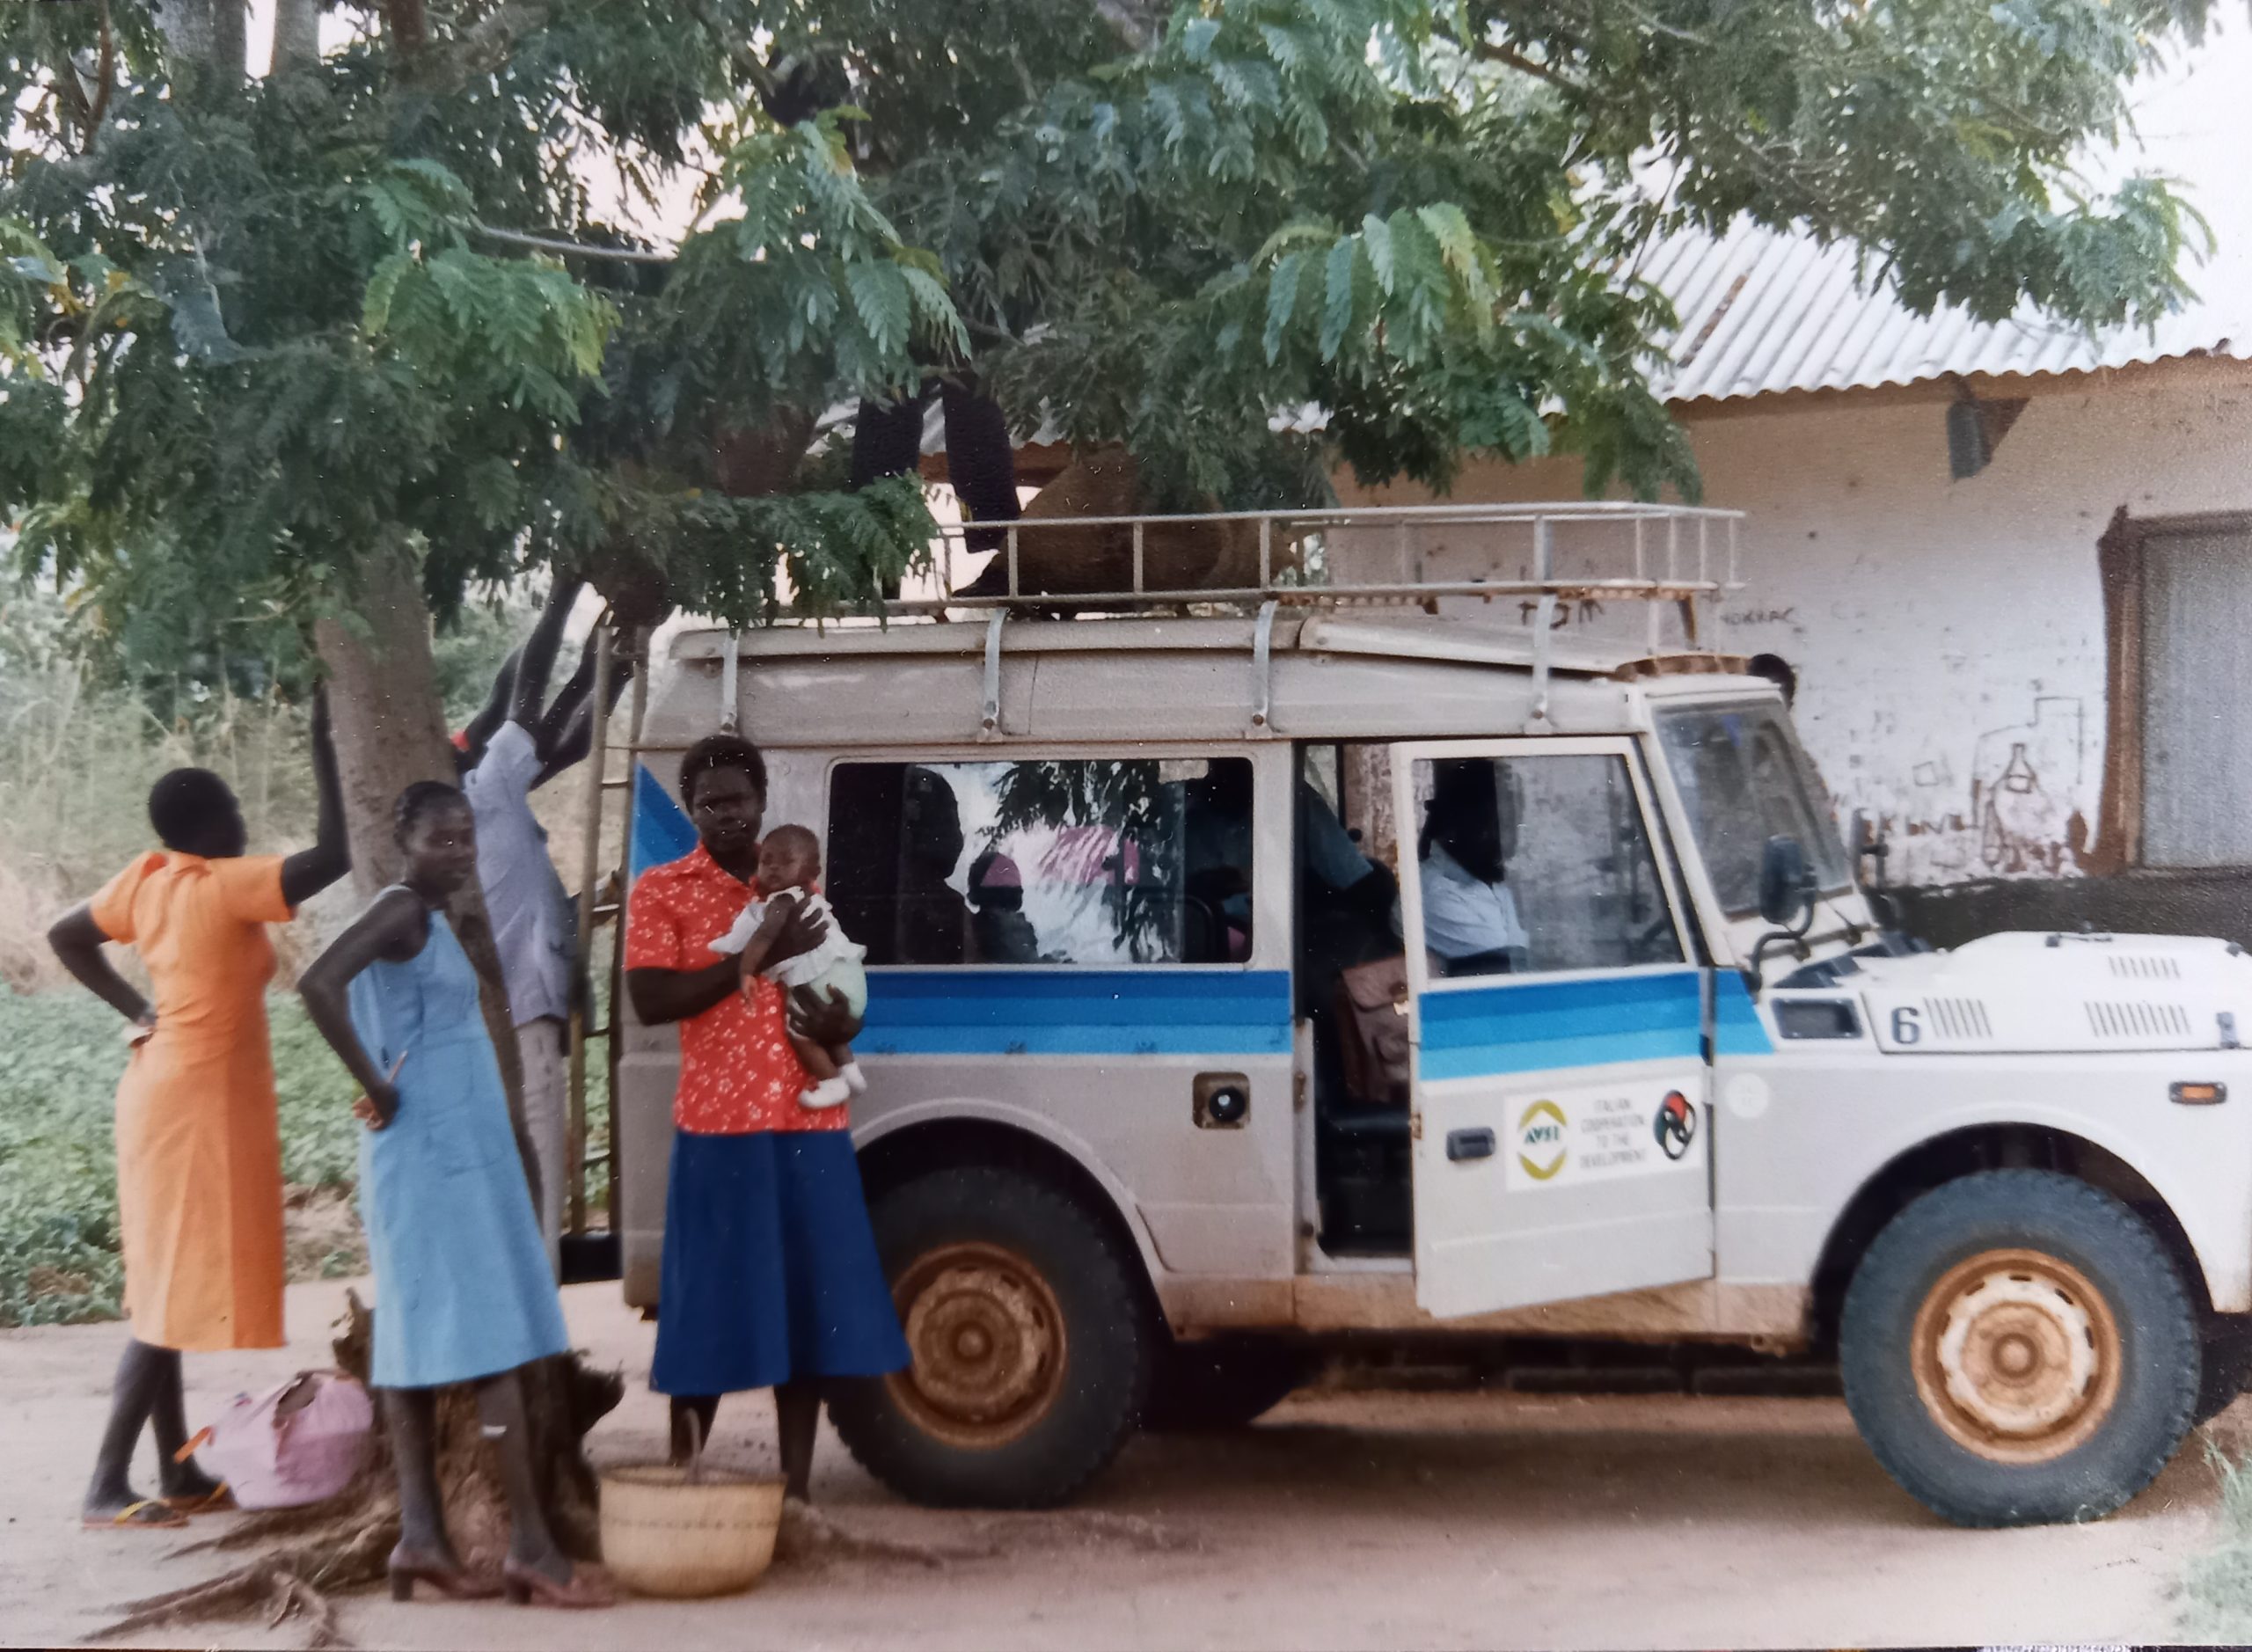 Filippo Ciantia - One of the 13 Campagnolas provided by AVSI. Here pictured in Kitgum Matidi Dispensary, by then, the highest endemic area of Guinea Worm in the world.